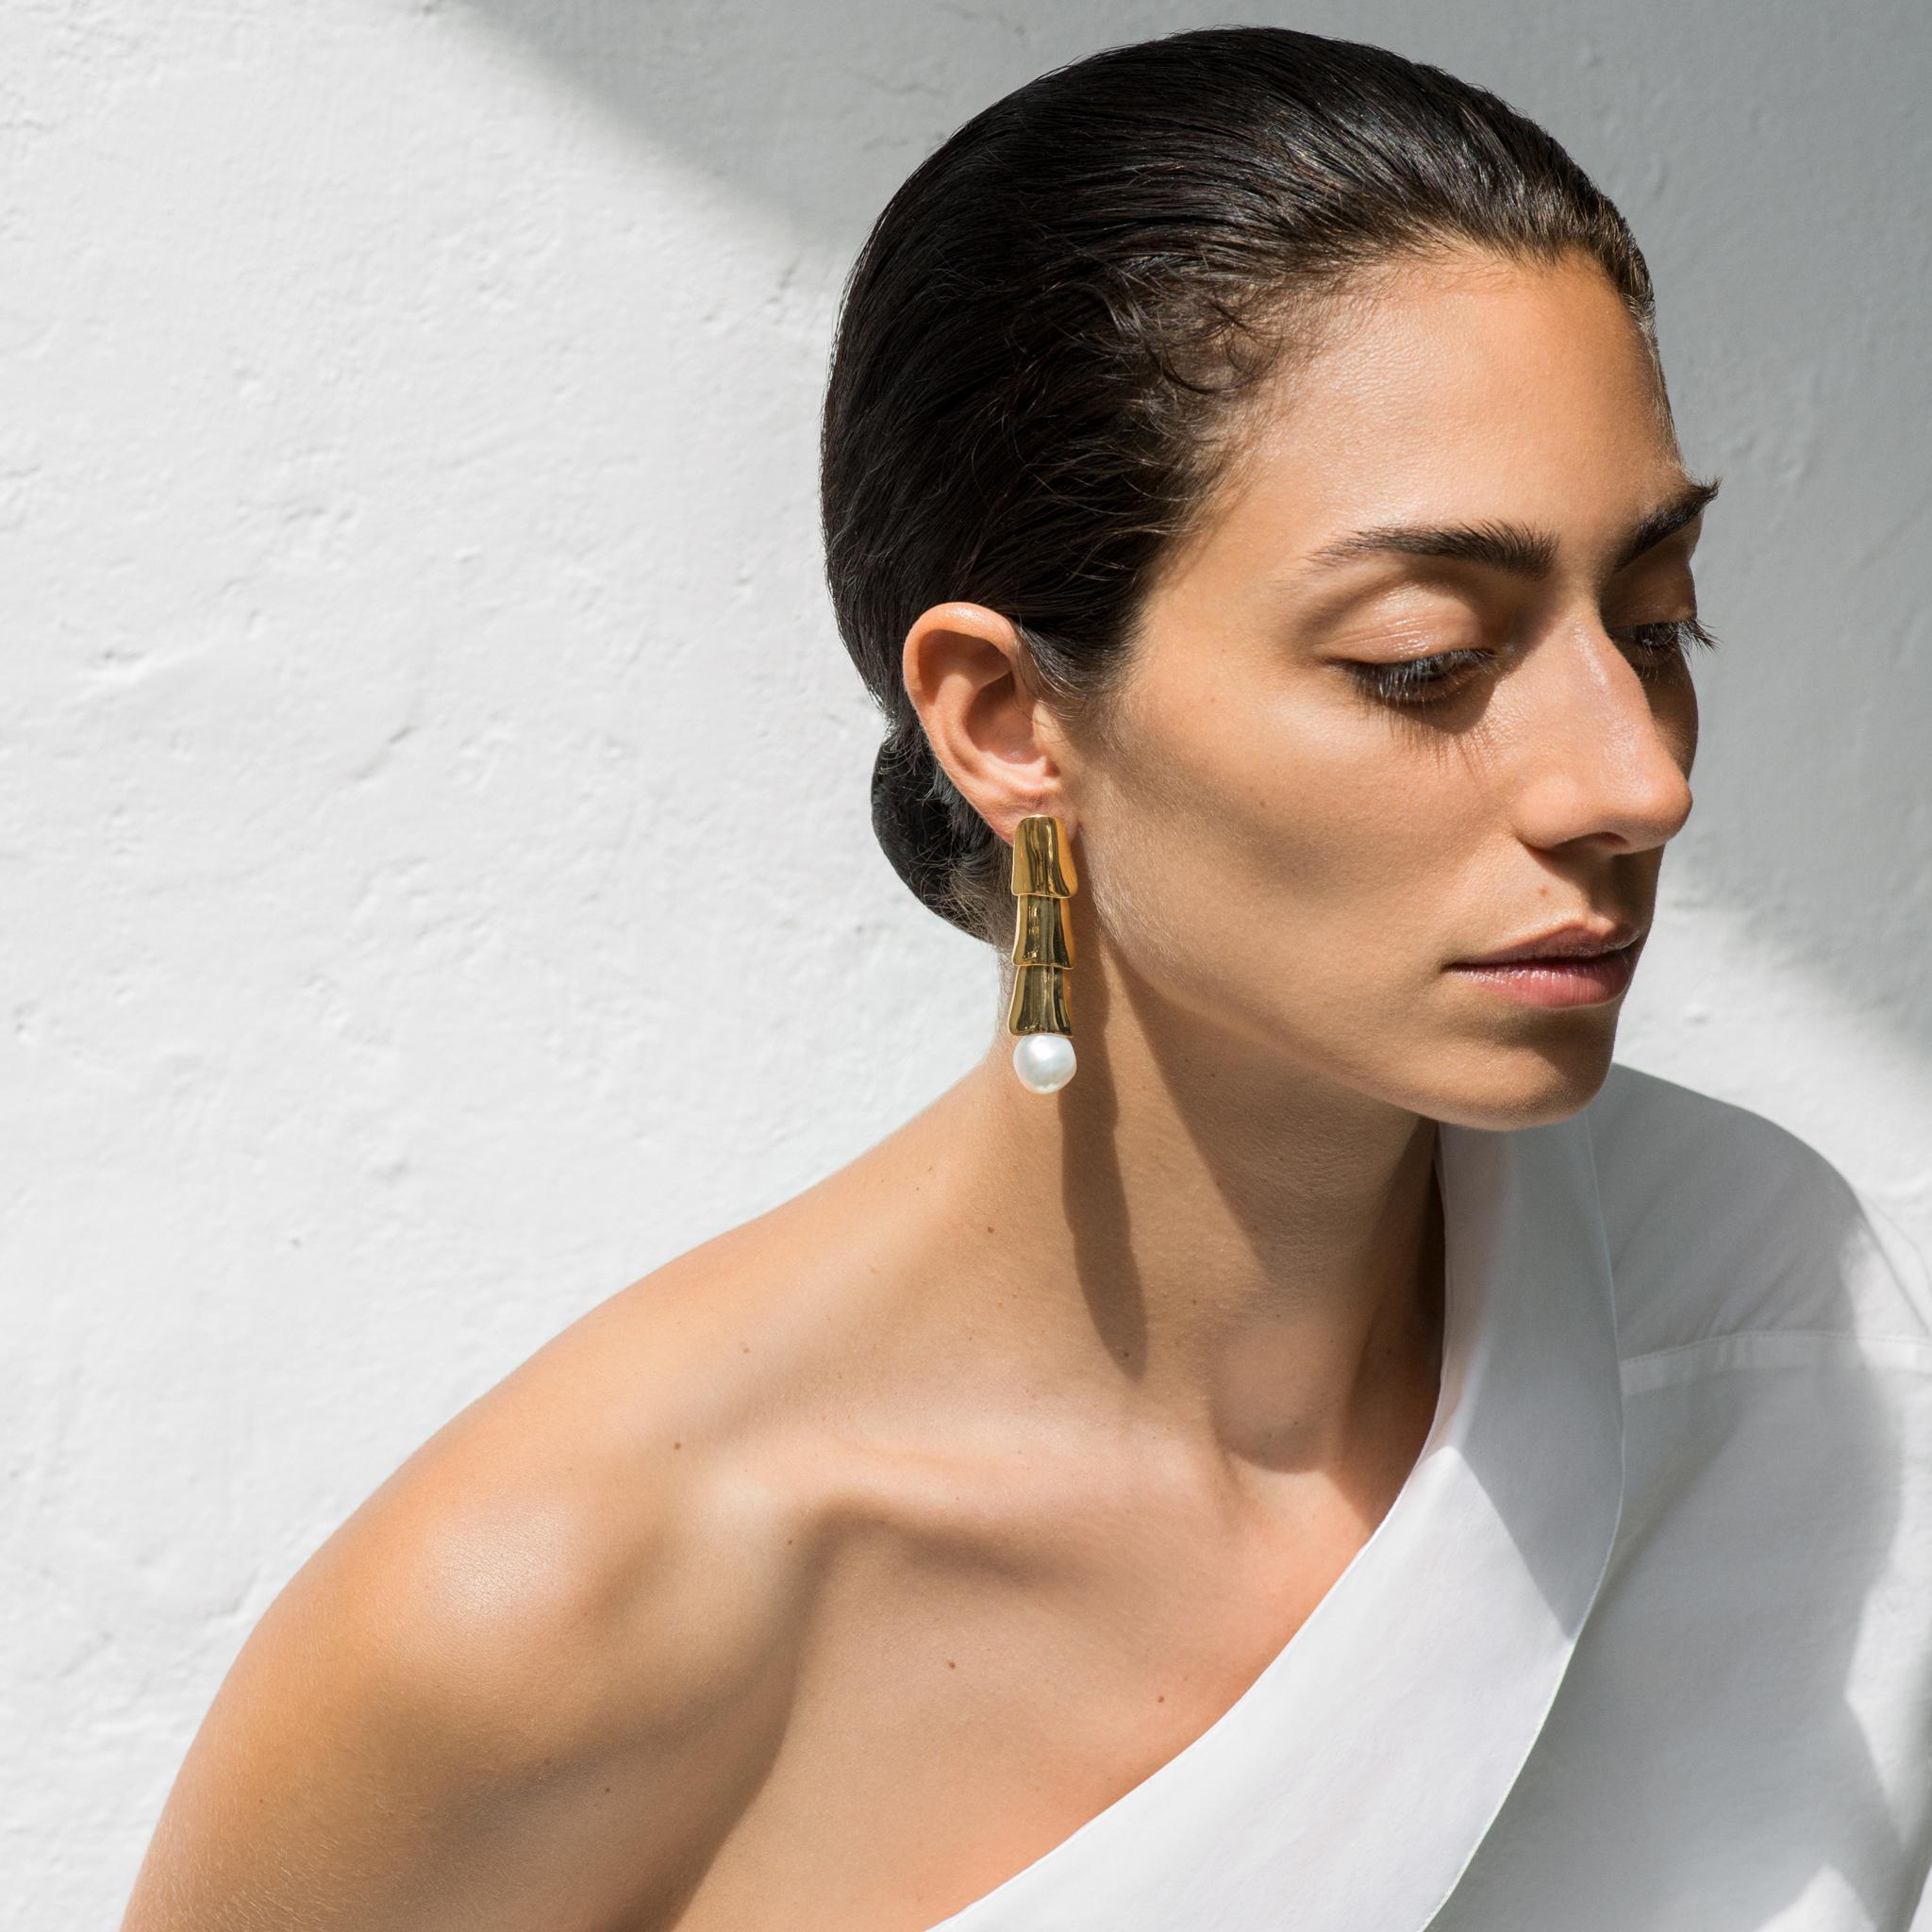 AGMES Gold Vermeil layered Drop Earrings with Freshwater Pearls.
Sterling Silver Post.
Also available in Sterling Silver.  Kindly contact us if interested for further information.
Handmade in NYC.  
Inspired by urban landscapes, architecture and